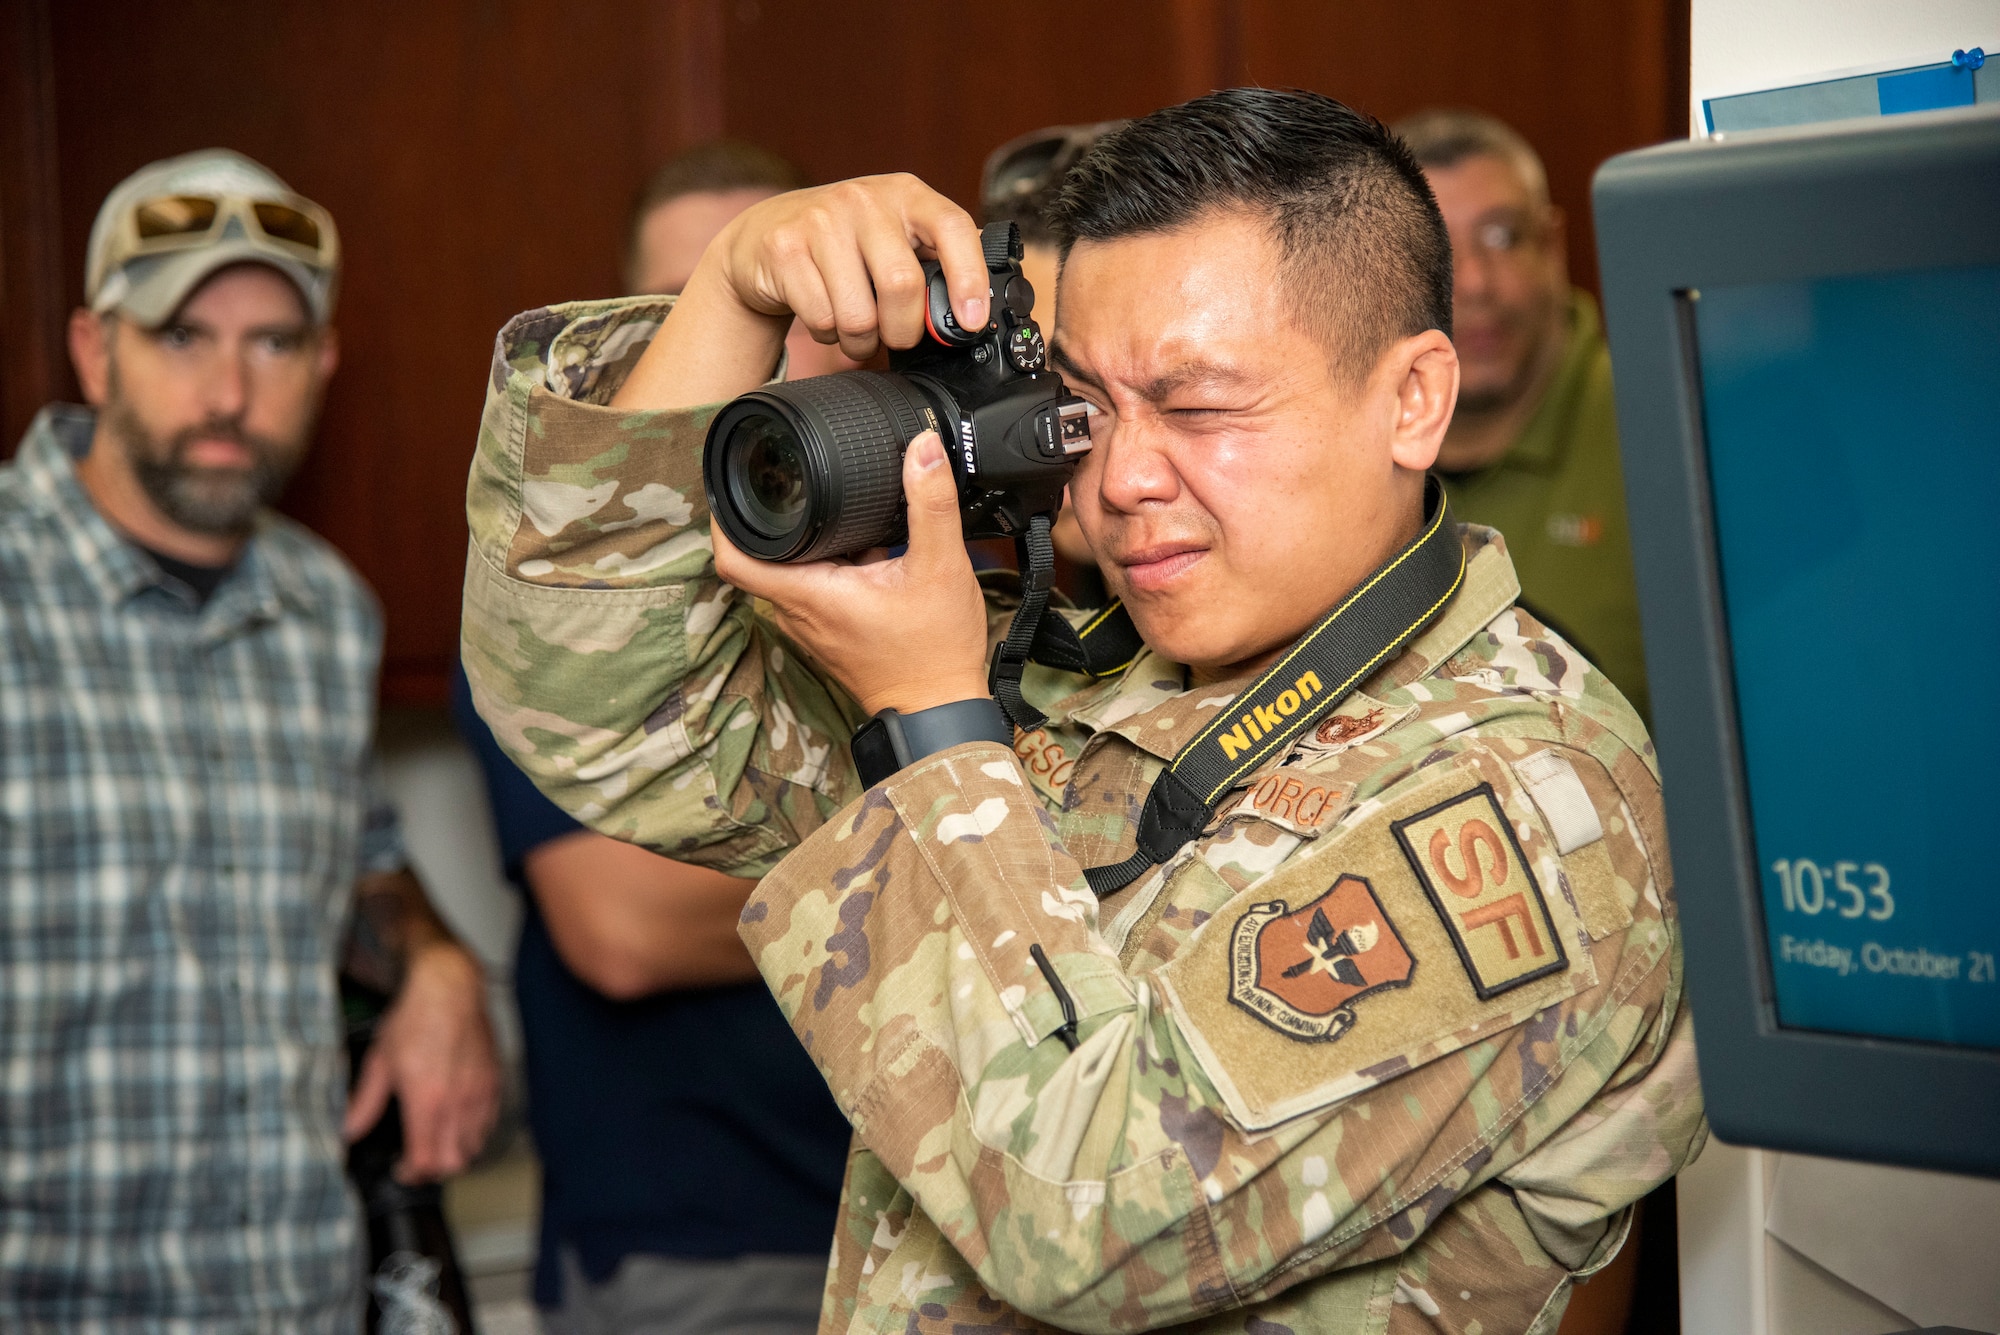 Tech. Sgt. Jesse Sengsouk, of the 502nd Security Forces Squadron who is preparing to become an OSI Agent, practices taking photos at a simulated investigation scene Oct. 21, 2022, at Joint Base San Antonio-Fort Sam Houston, Texas. (U.S. Air Force photo by Kara Carrier)